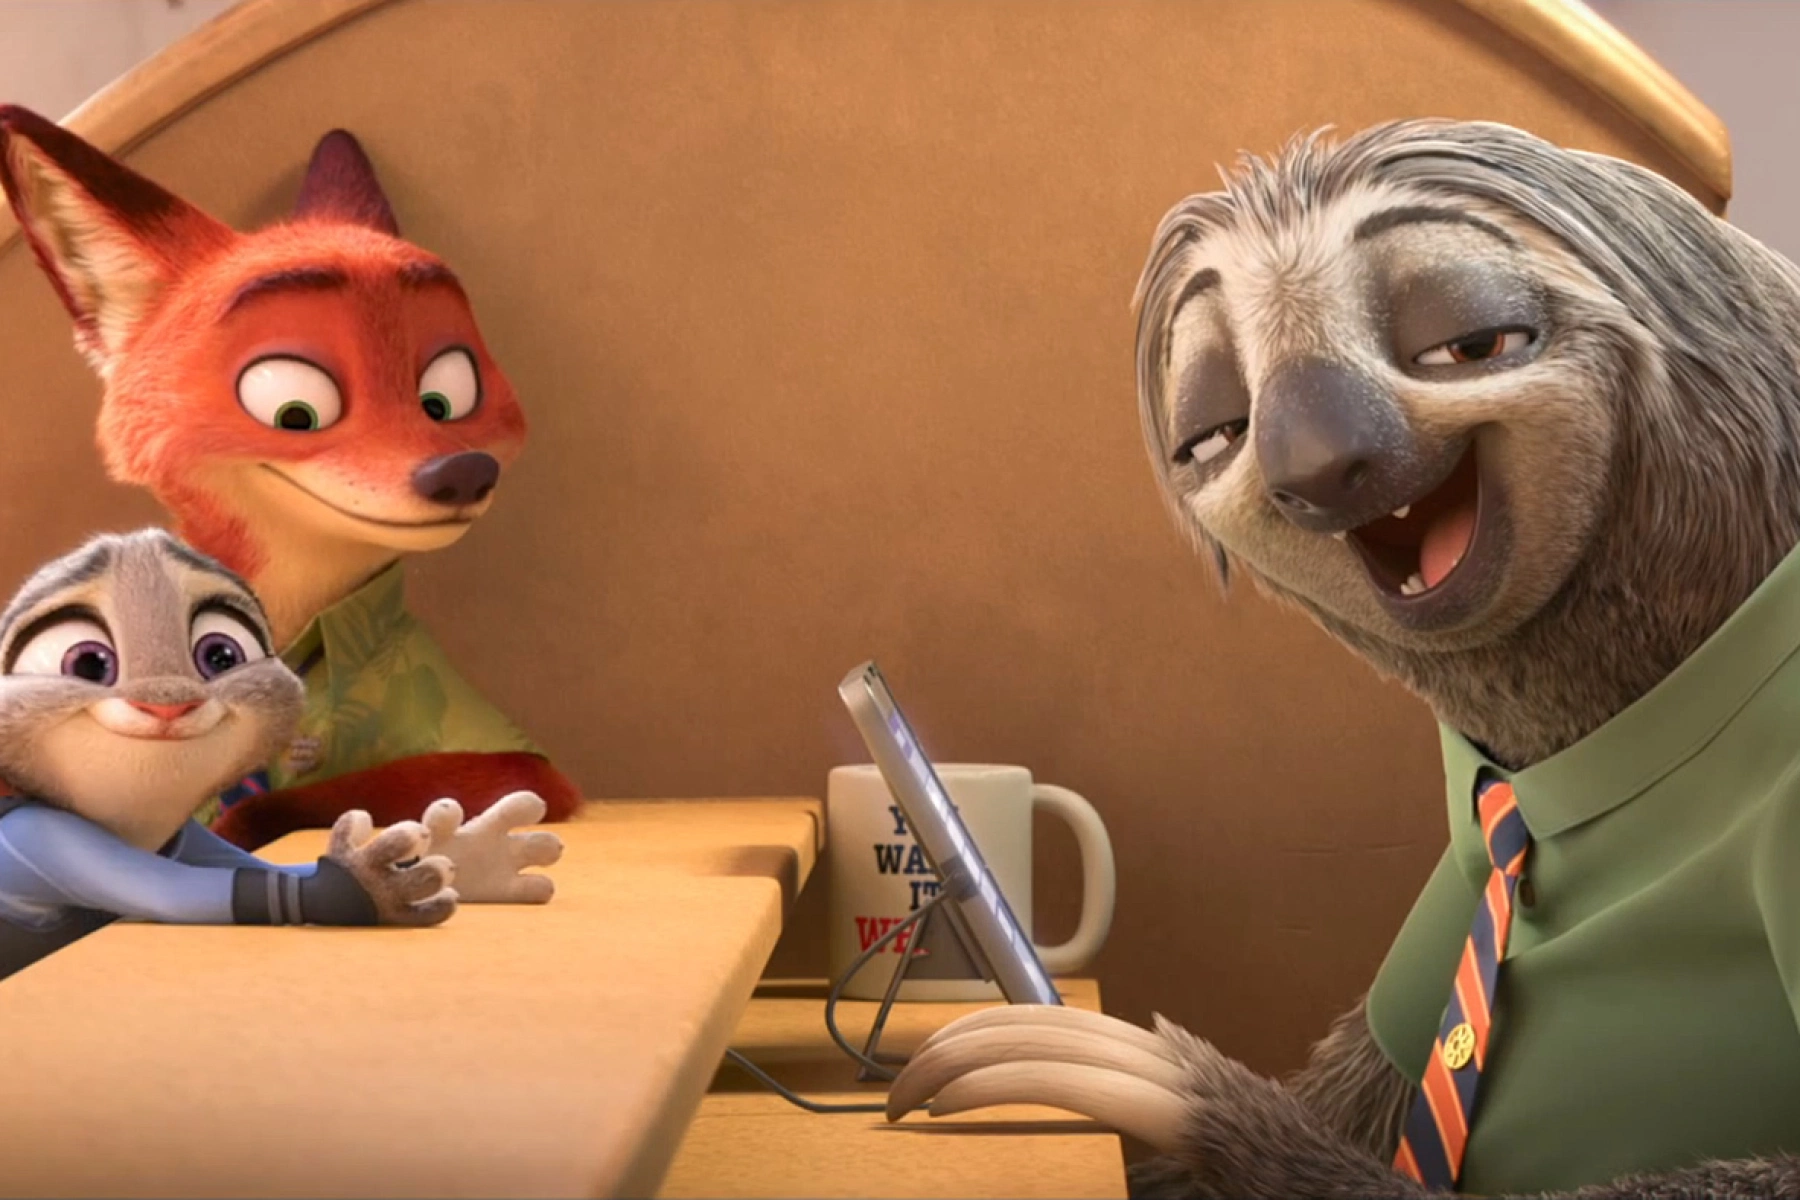 A clip from Zootopia